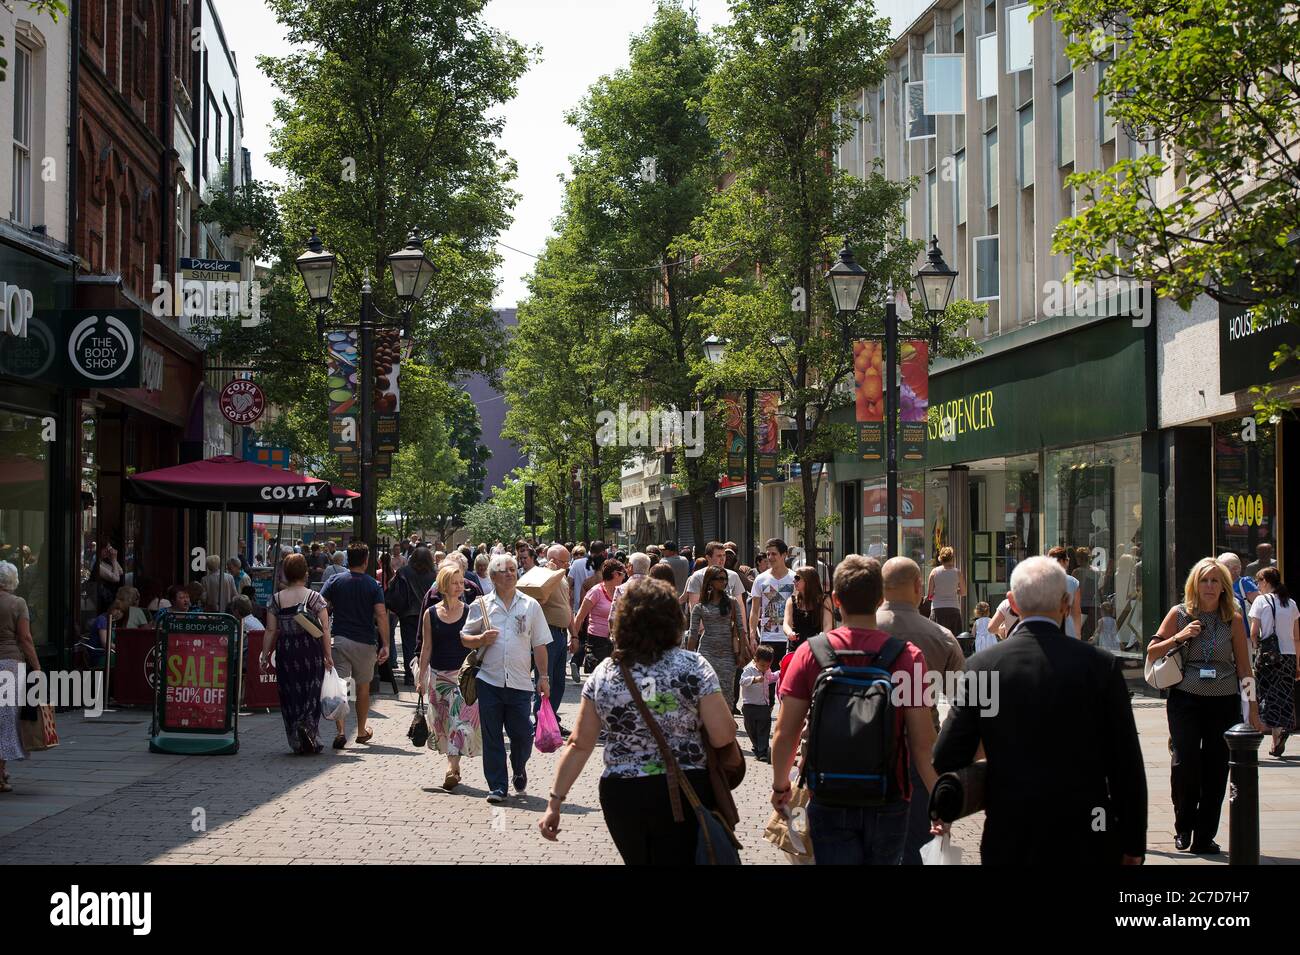 People shopping in Doncaster town centre, Yorkshire, England. Stock Photo